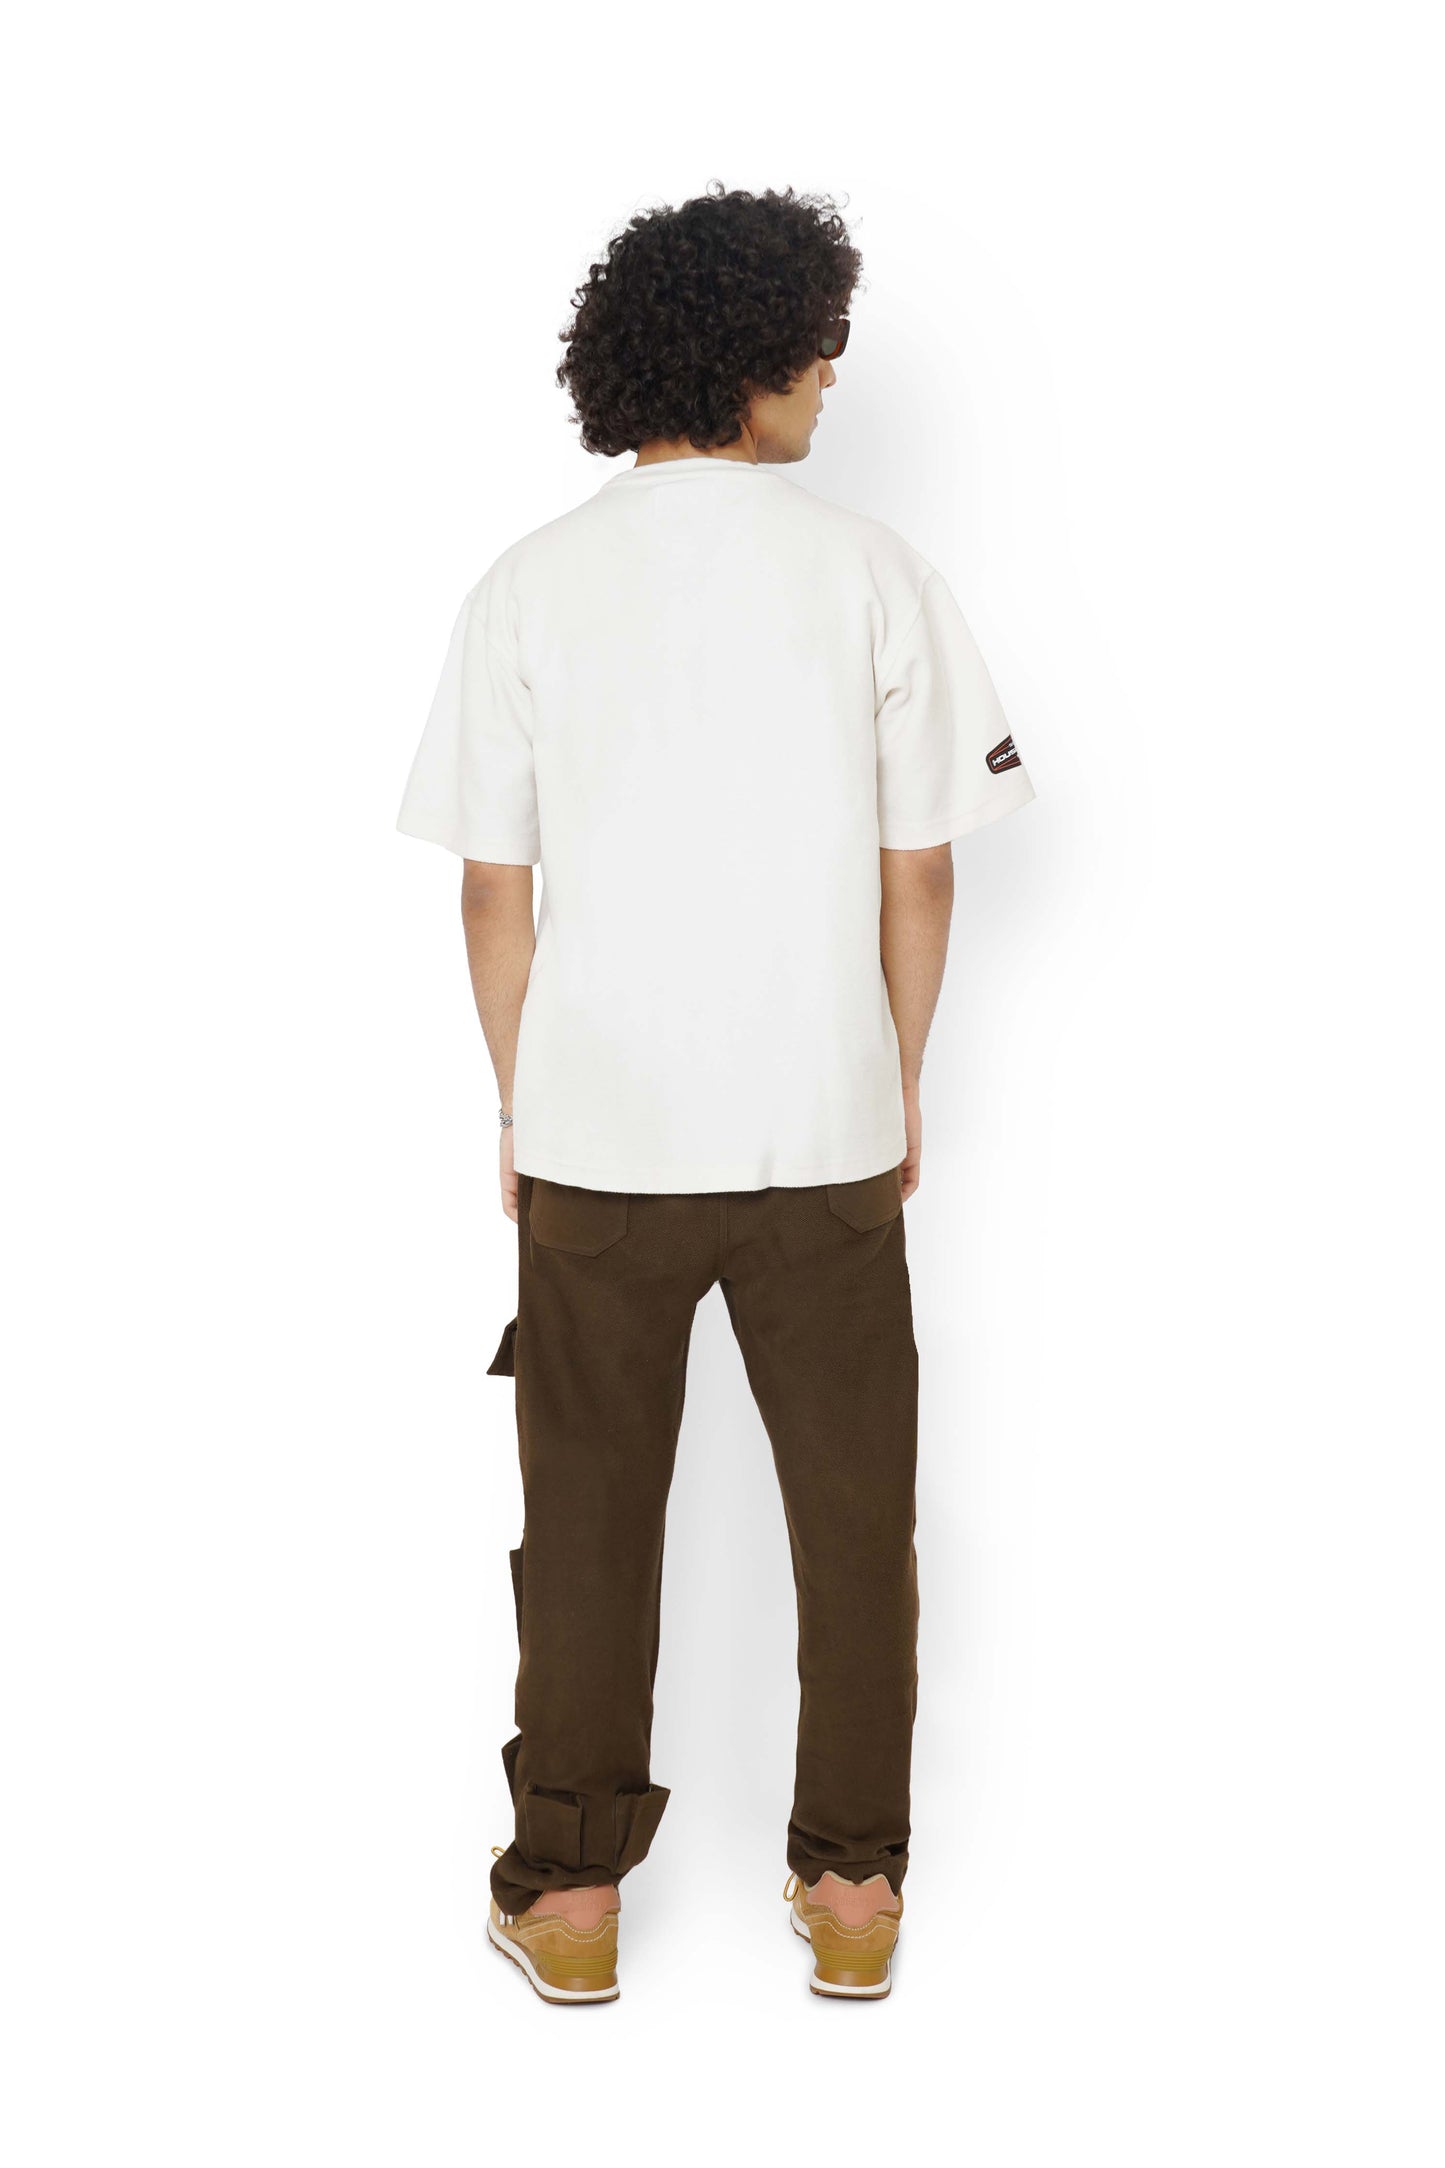 Cane Beige Graphic T-Shirt & Nut Brown Utility Cargo Track Pants Set